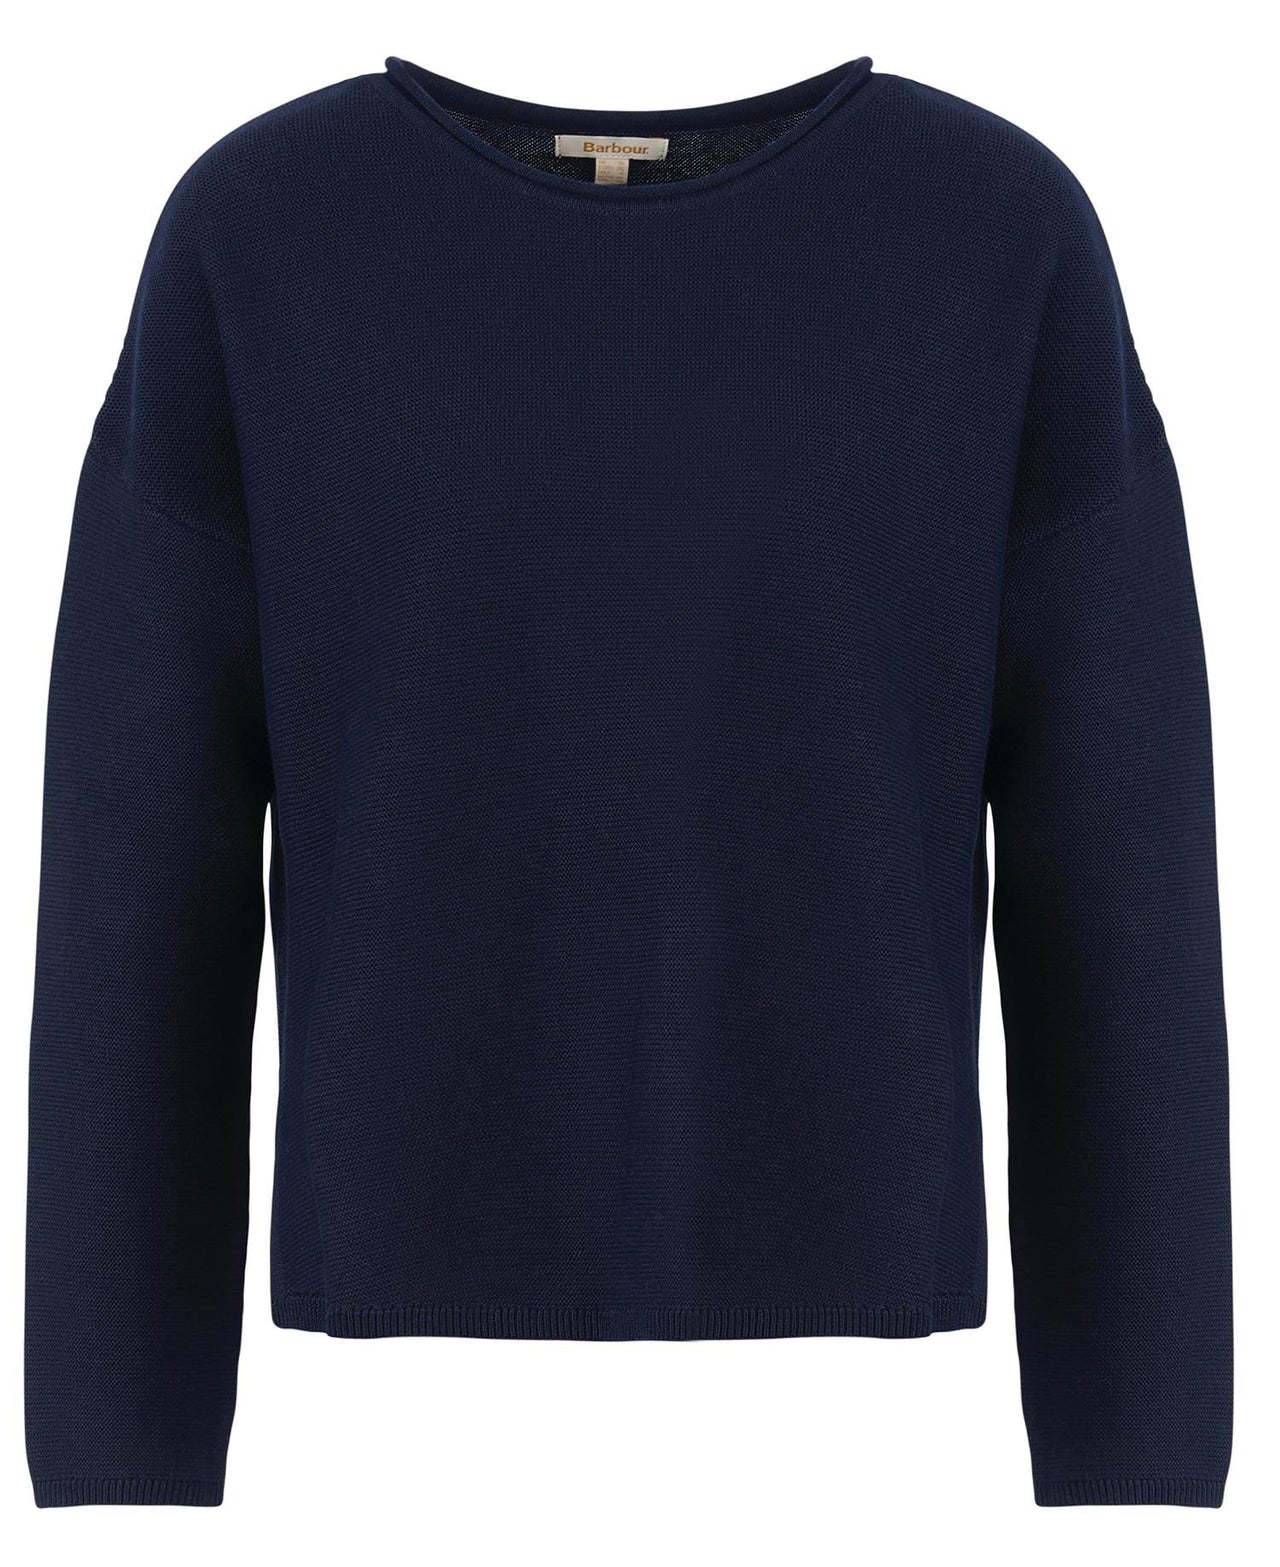 Barbour Marine Knitted Jumper